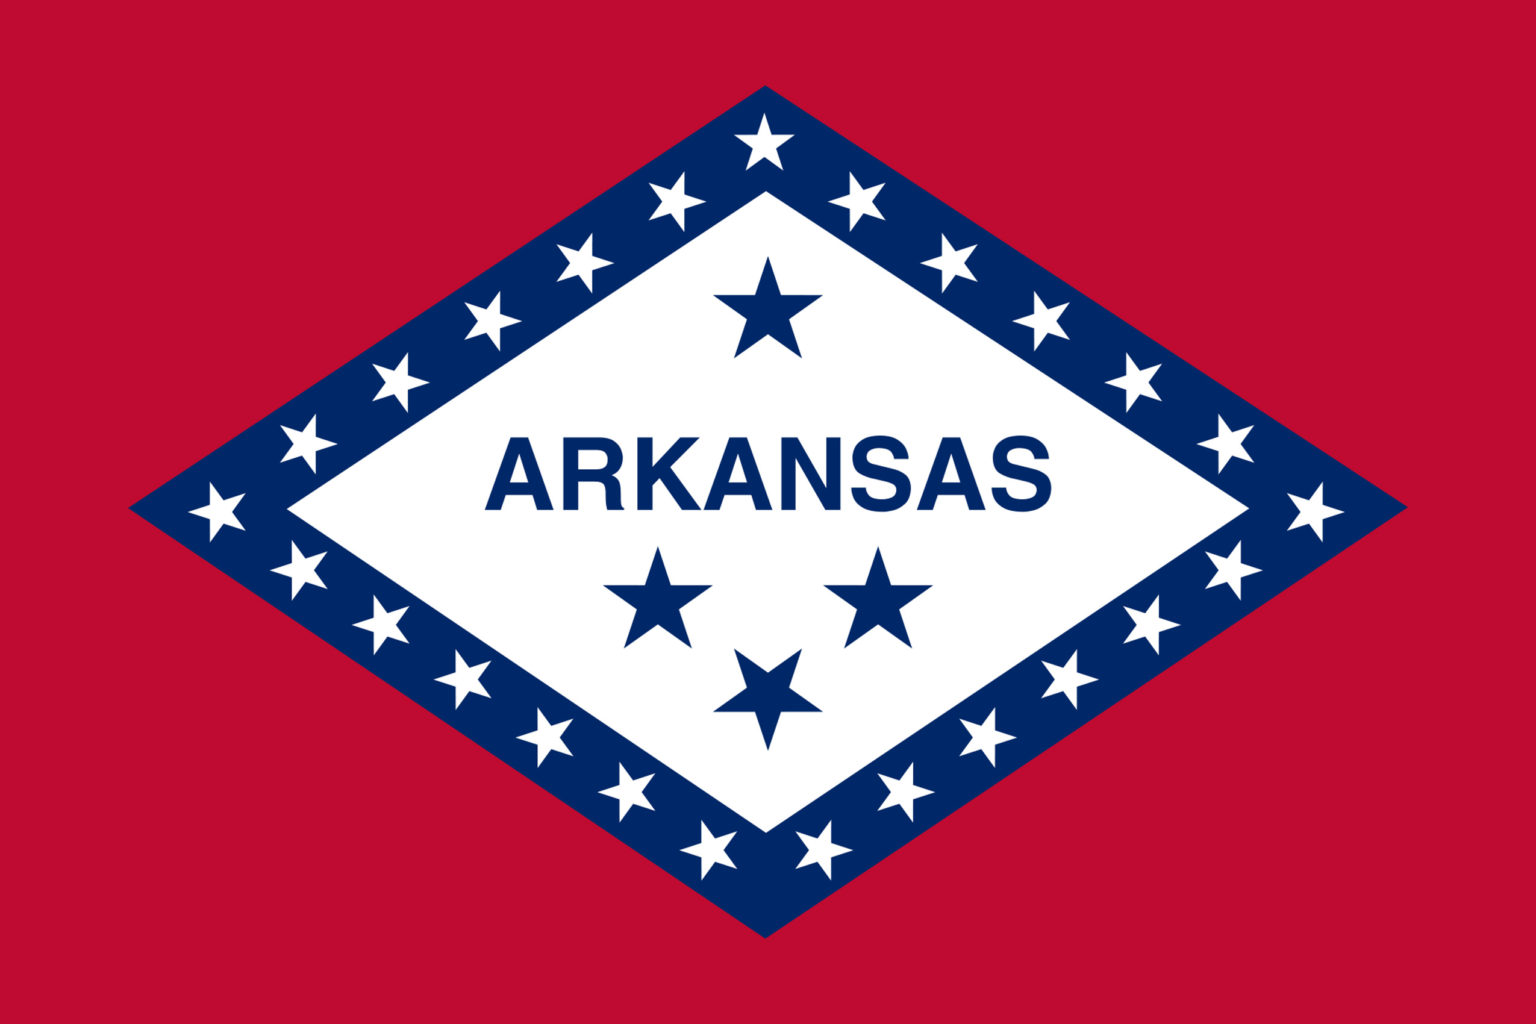 SPEAK UP ARKANSAS Redistricting, your voting rights, and why the maps